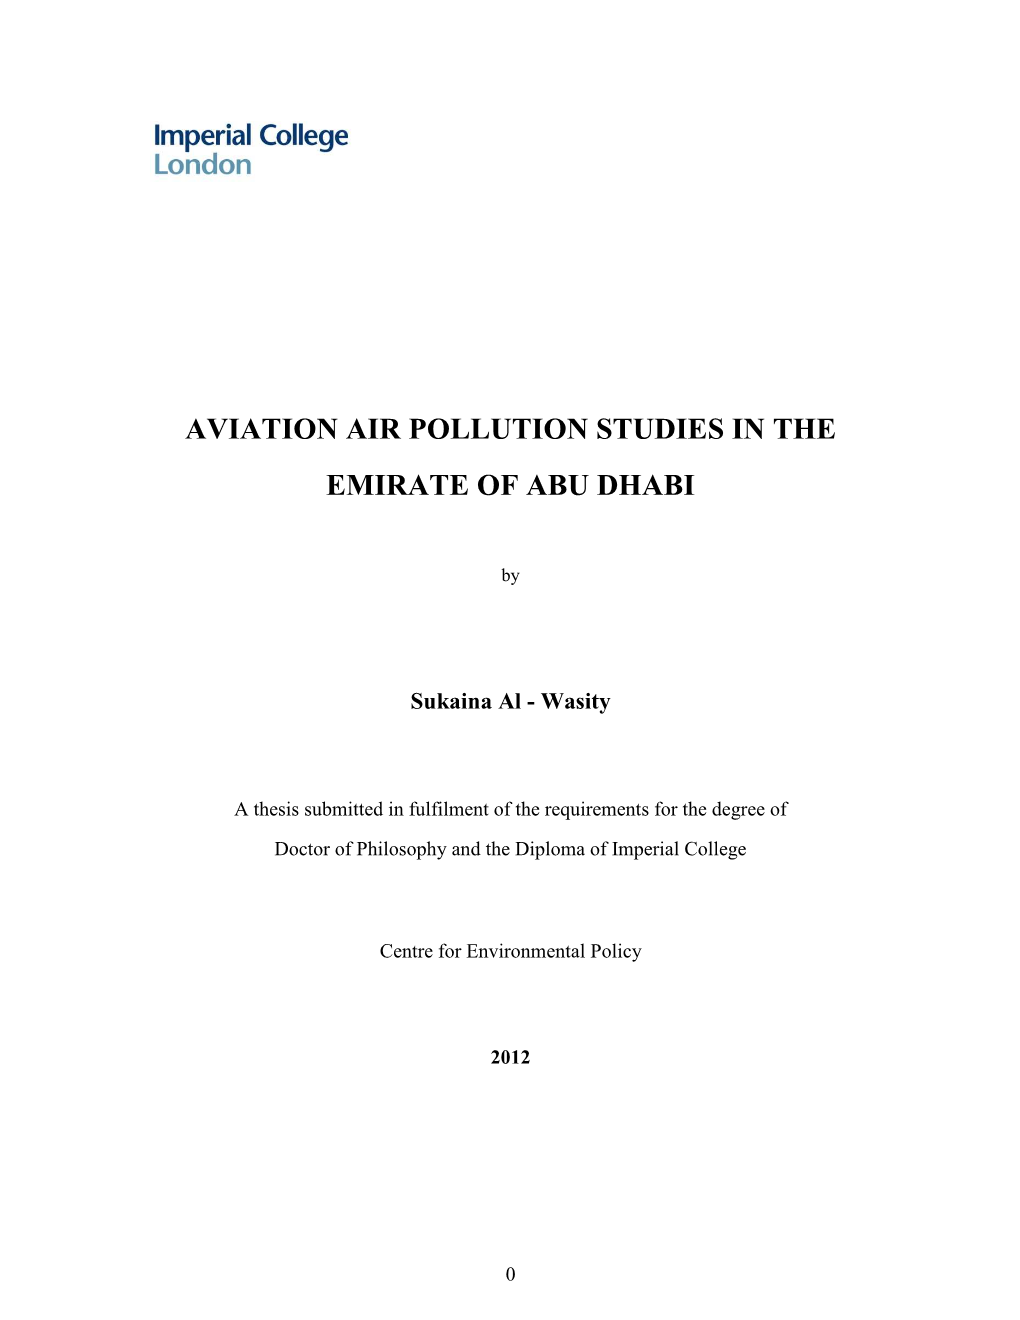 Aviation Air Pollution Studies in the Emirate of Abu Dhabi